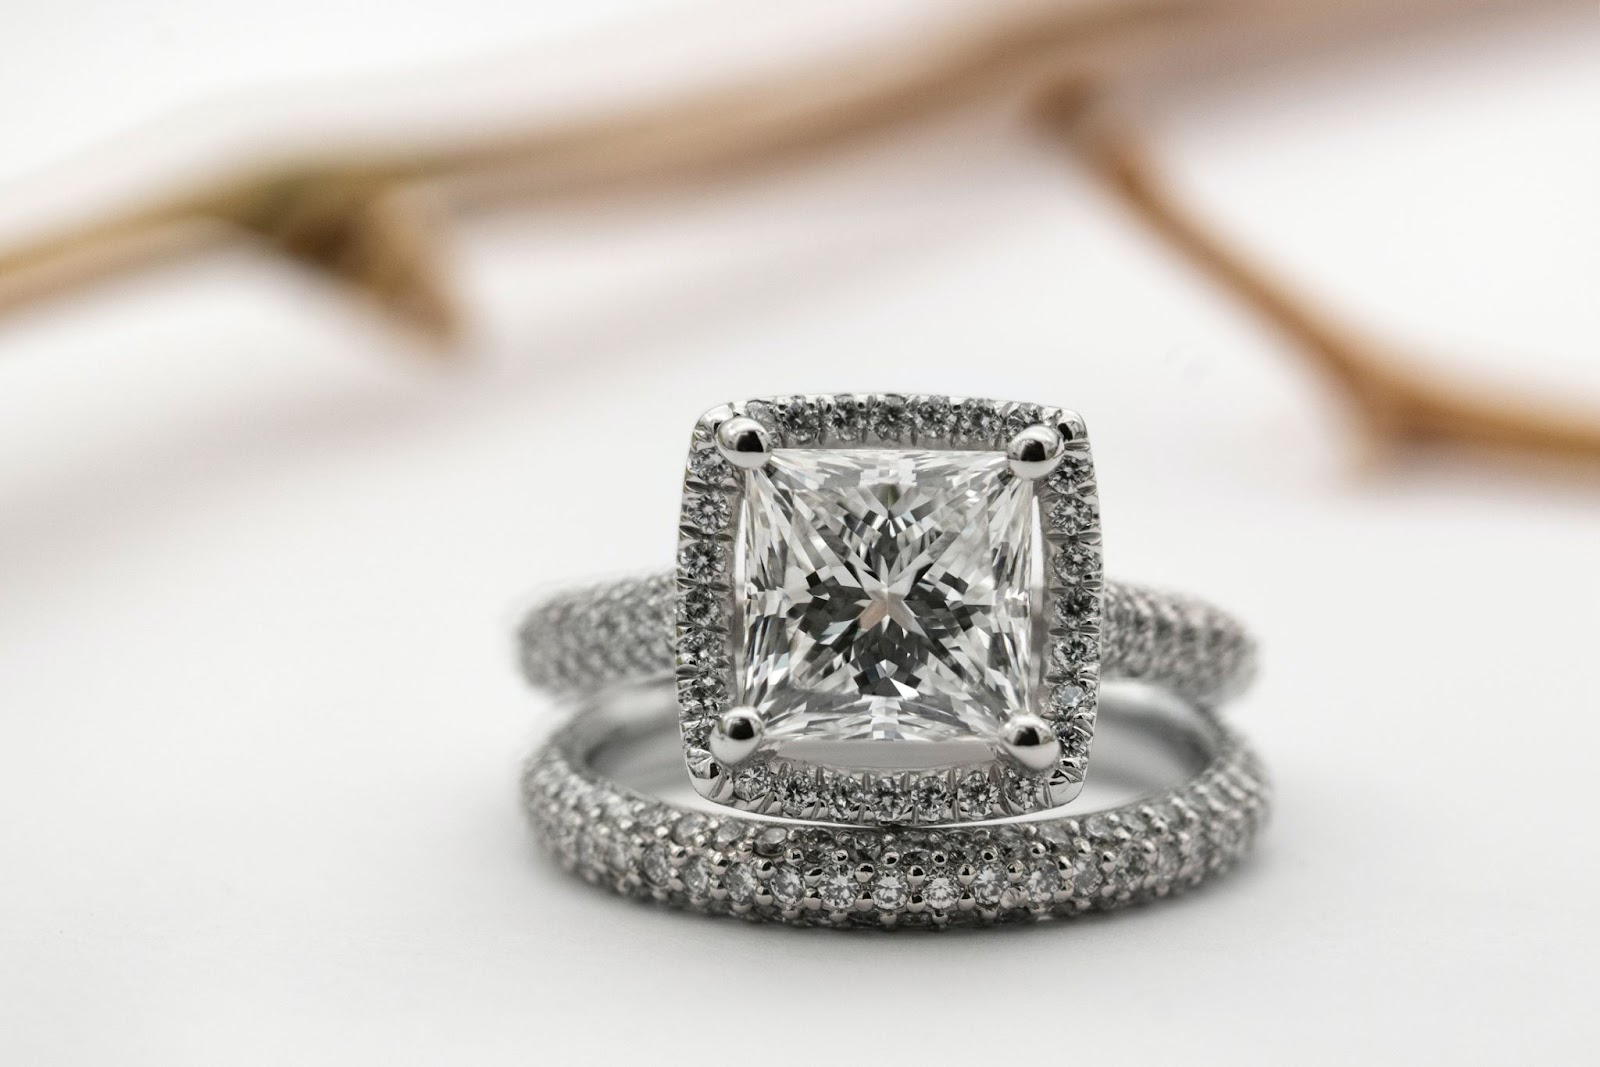 3 Ways to Find the Best Ring for Your Budget in a Pawn Shop